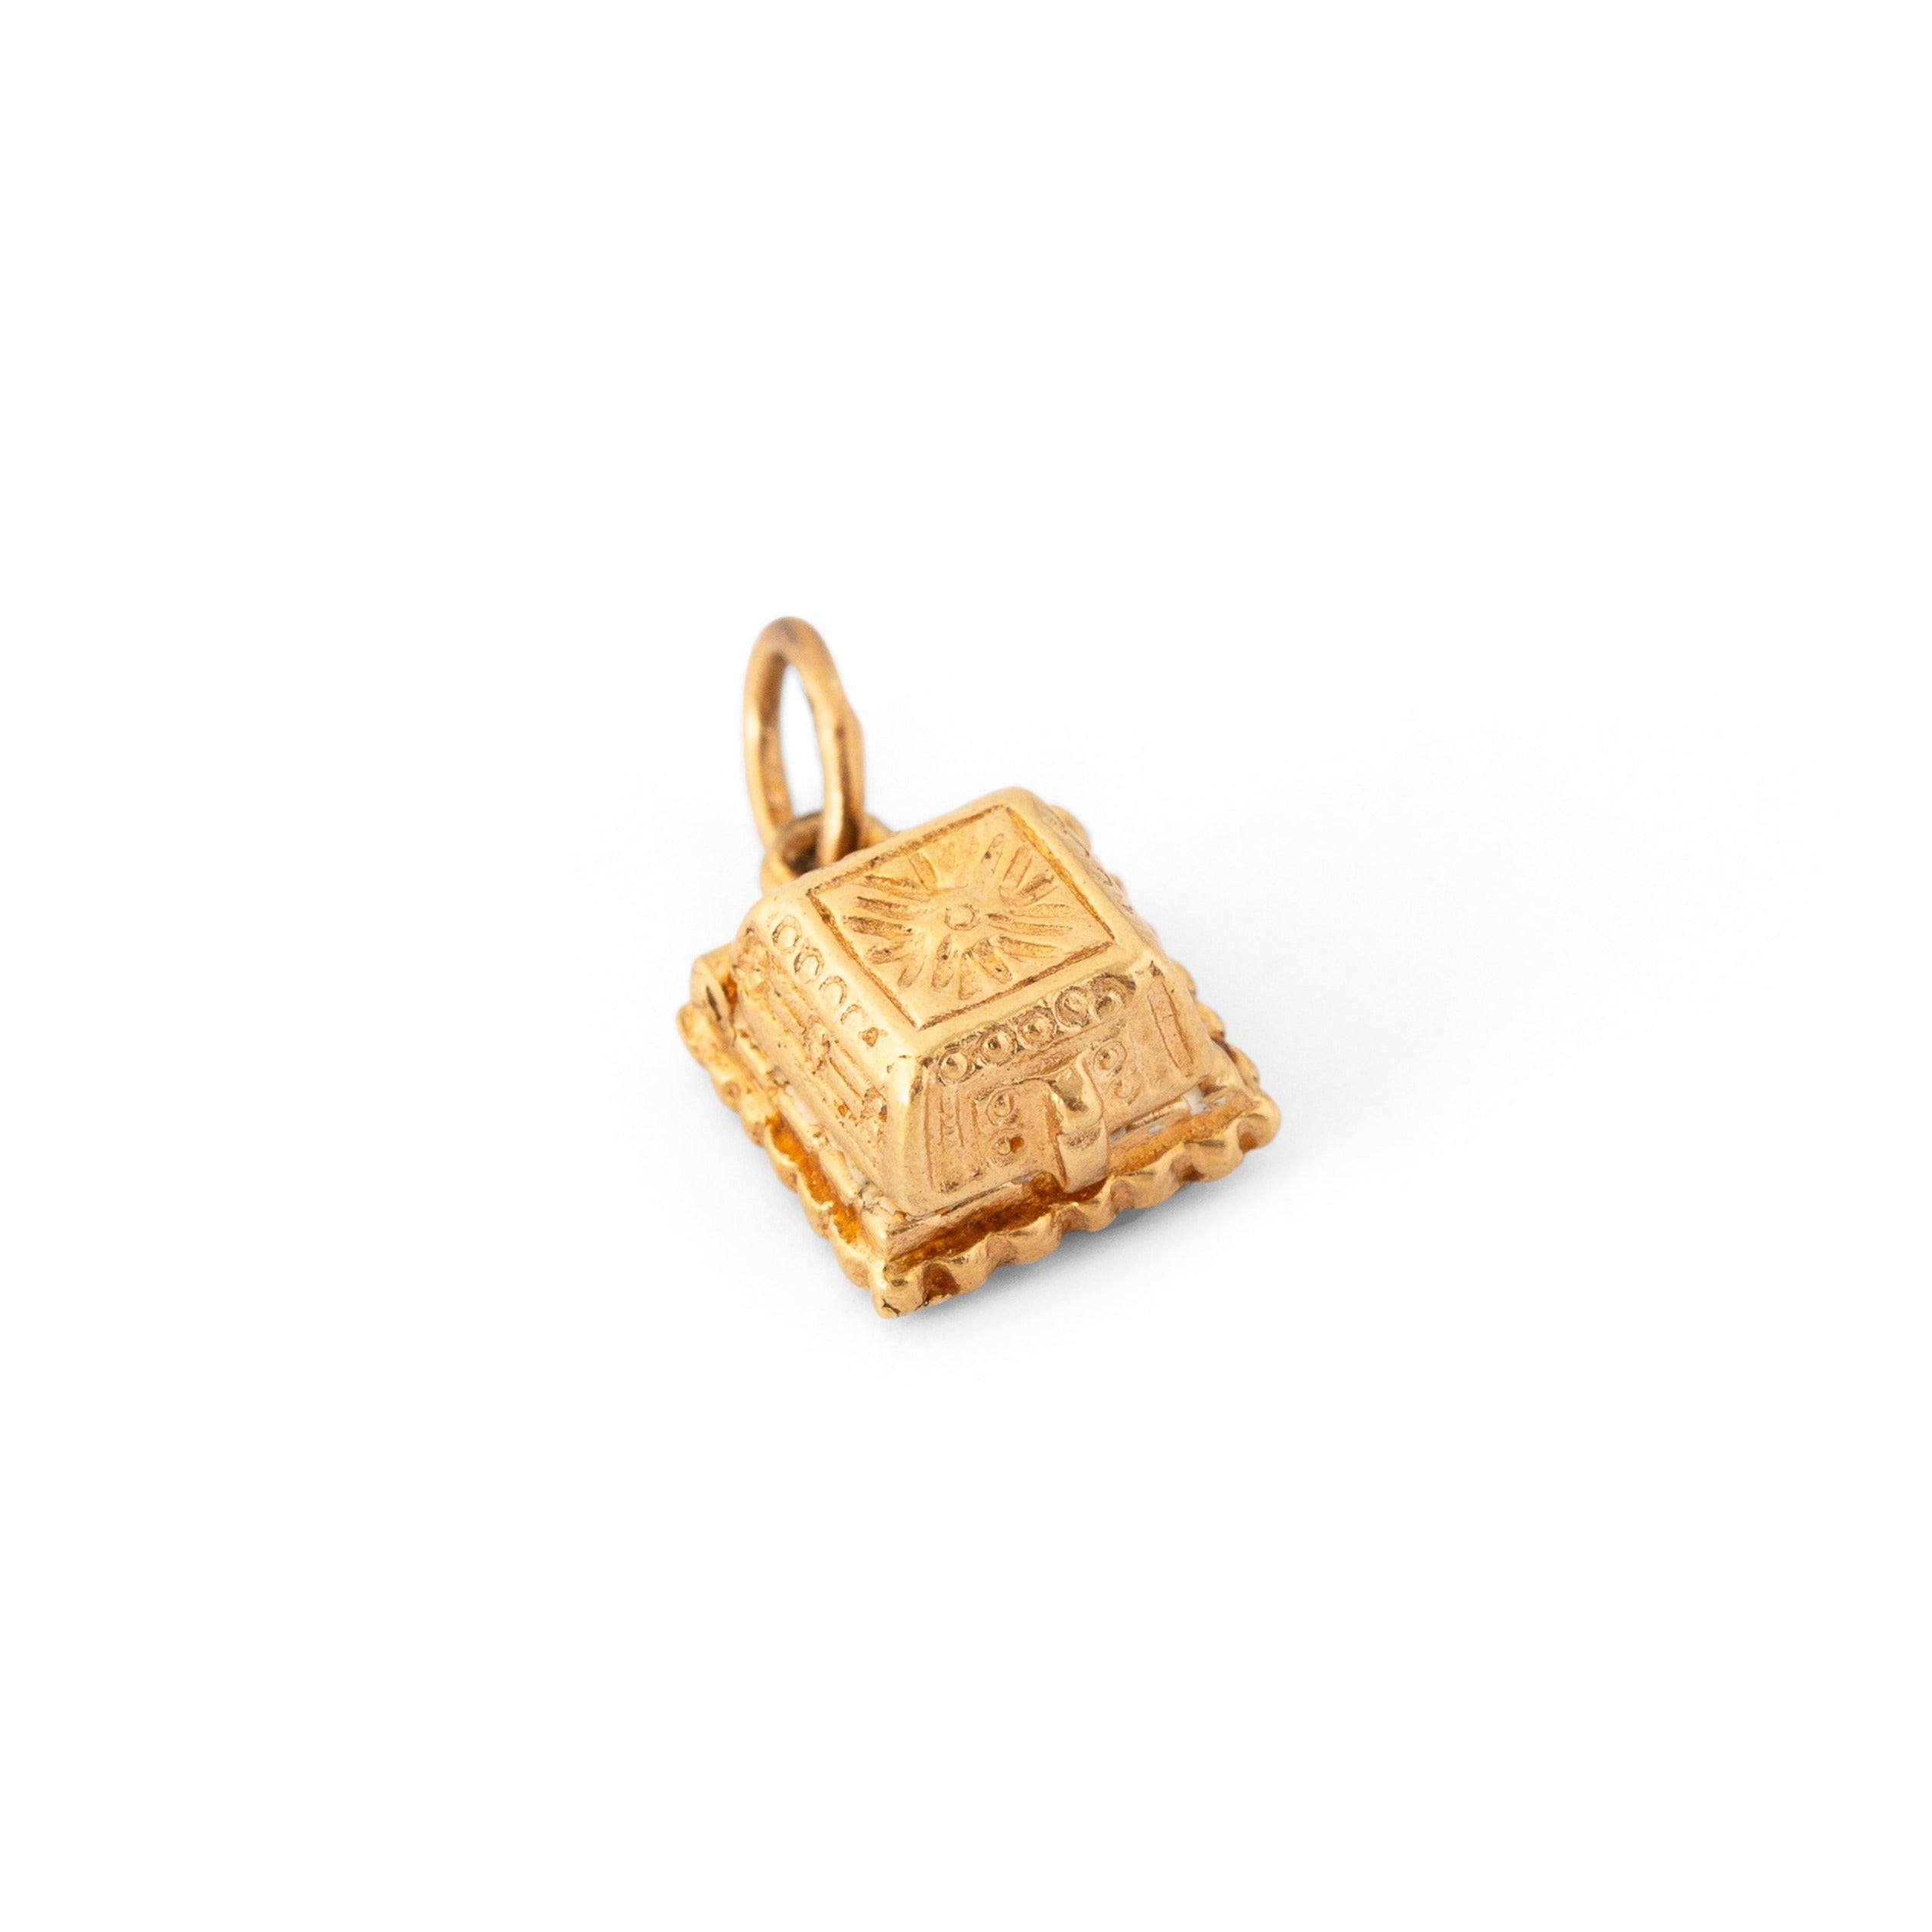 Movable Diamond and 14K Gold Engagement Ring Box Charm